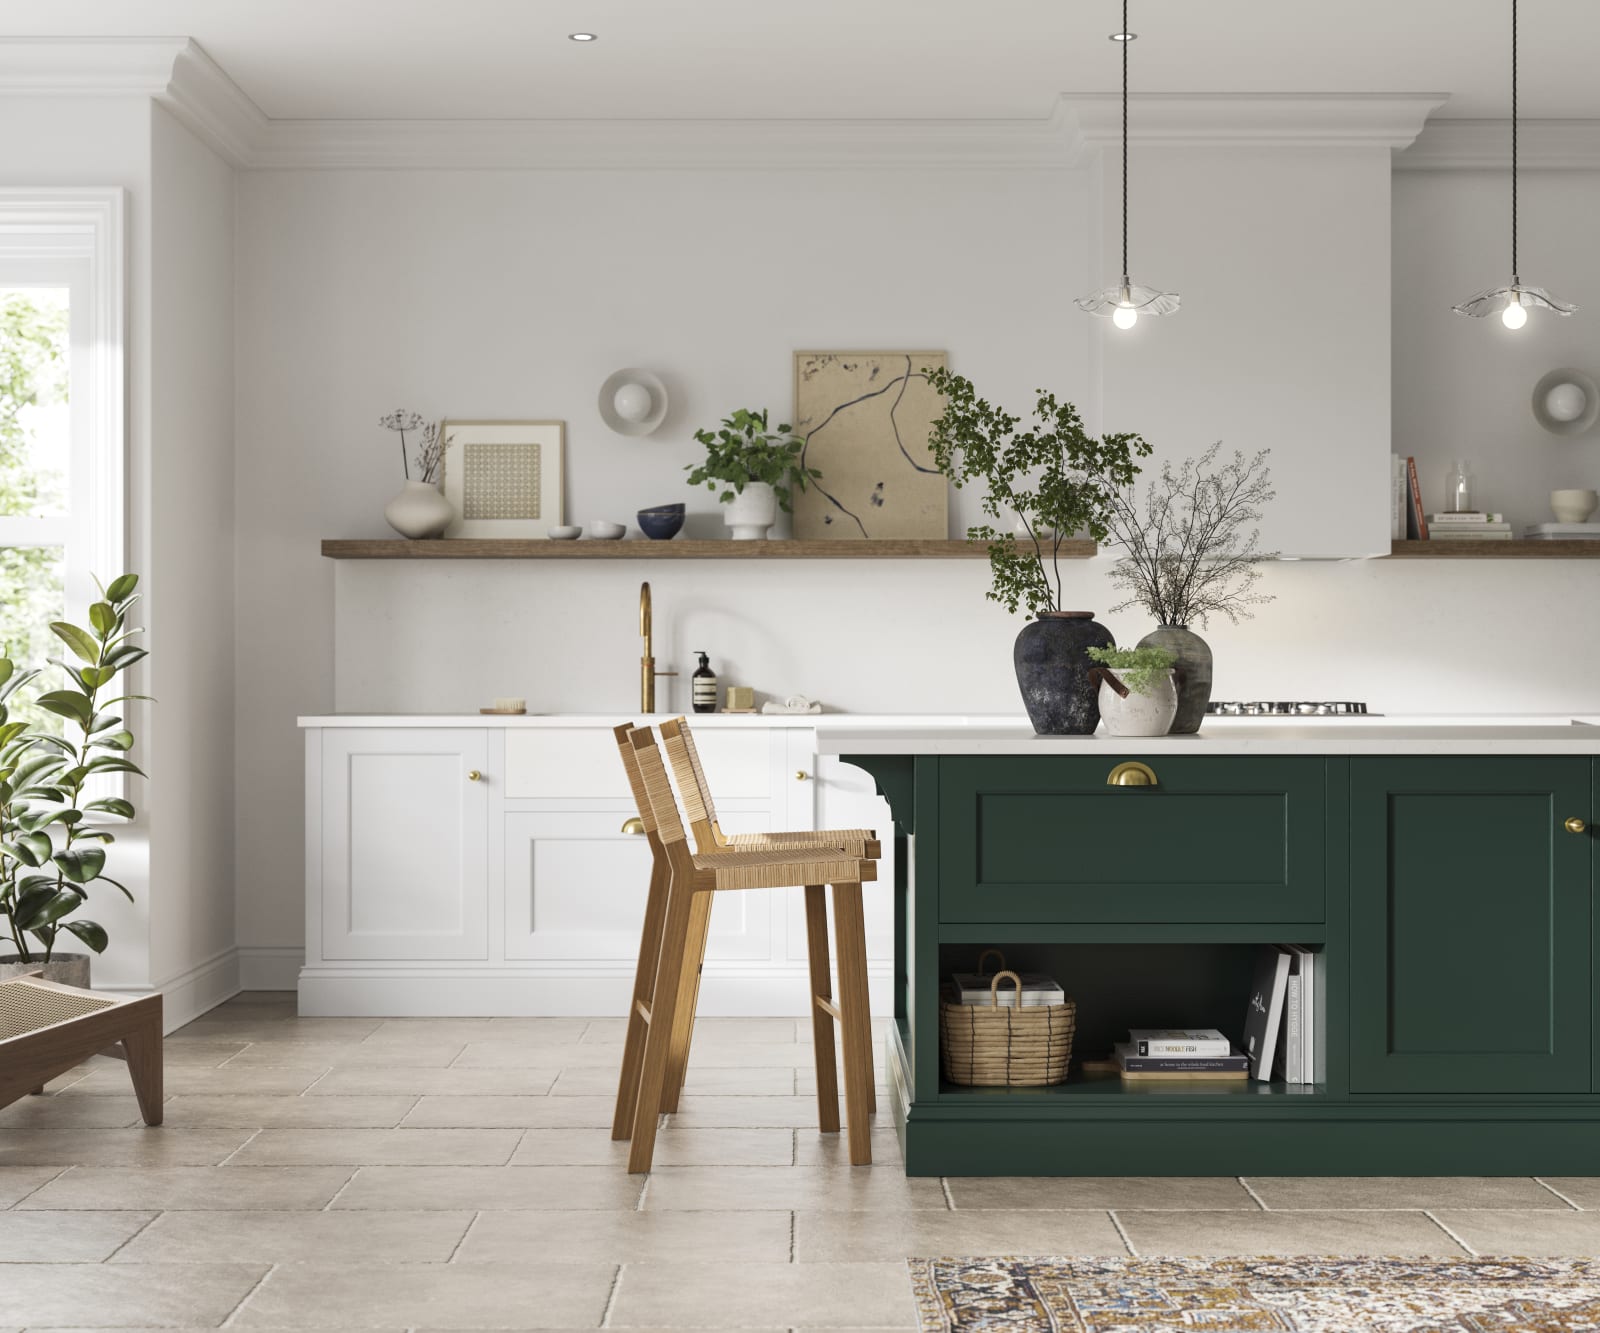 Ludlow, a traditional Shaker-style white kitchen with a Regency green kitchen island